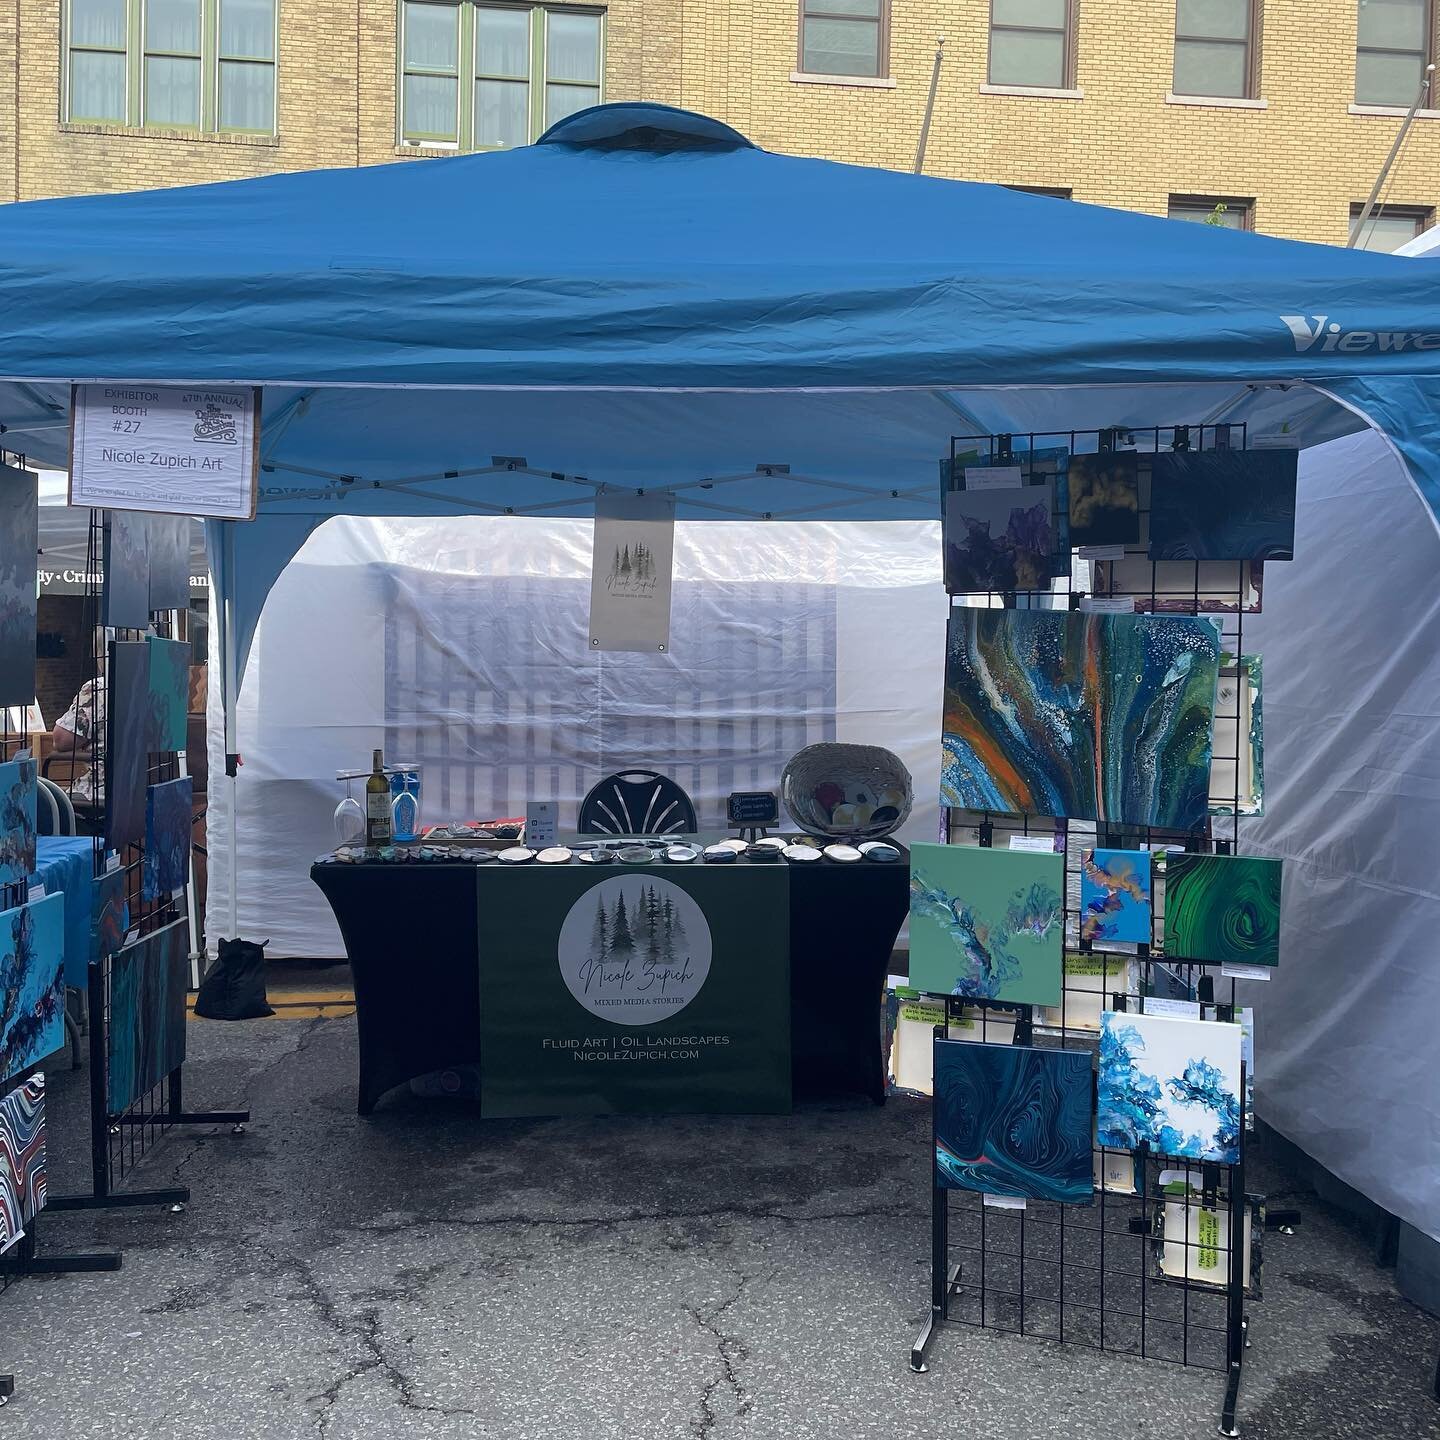 Day 2! Had to go back last night at 10:15pm because the festival called to tel me the roof blew off my damn tent. Saved all my canvases and we&rsquo;re ready to go for a DRY day today!

Come out and support local makers! 10am-5pm!